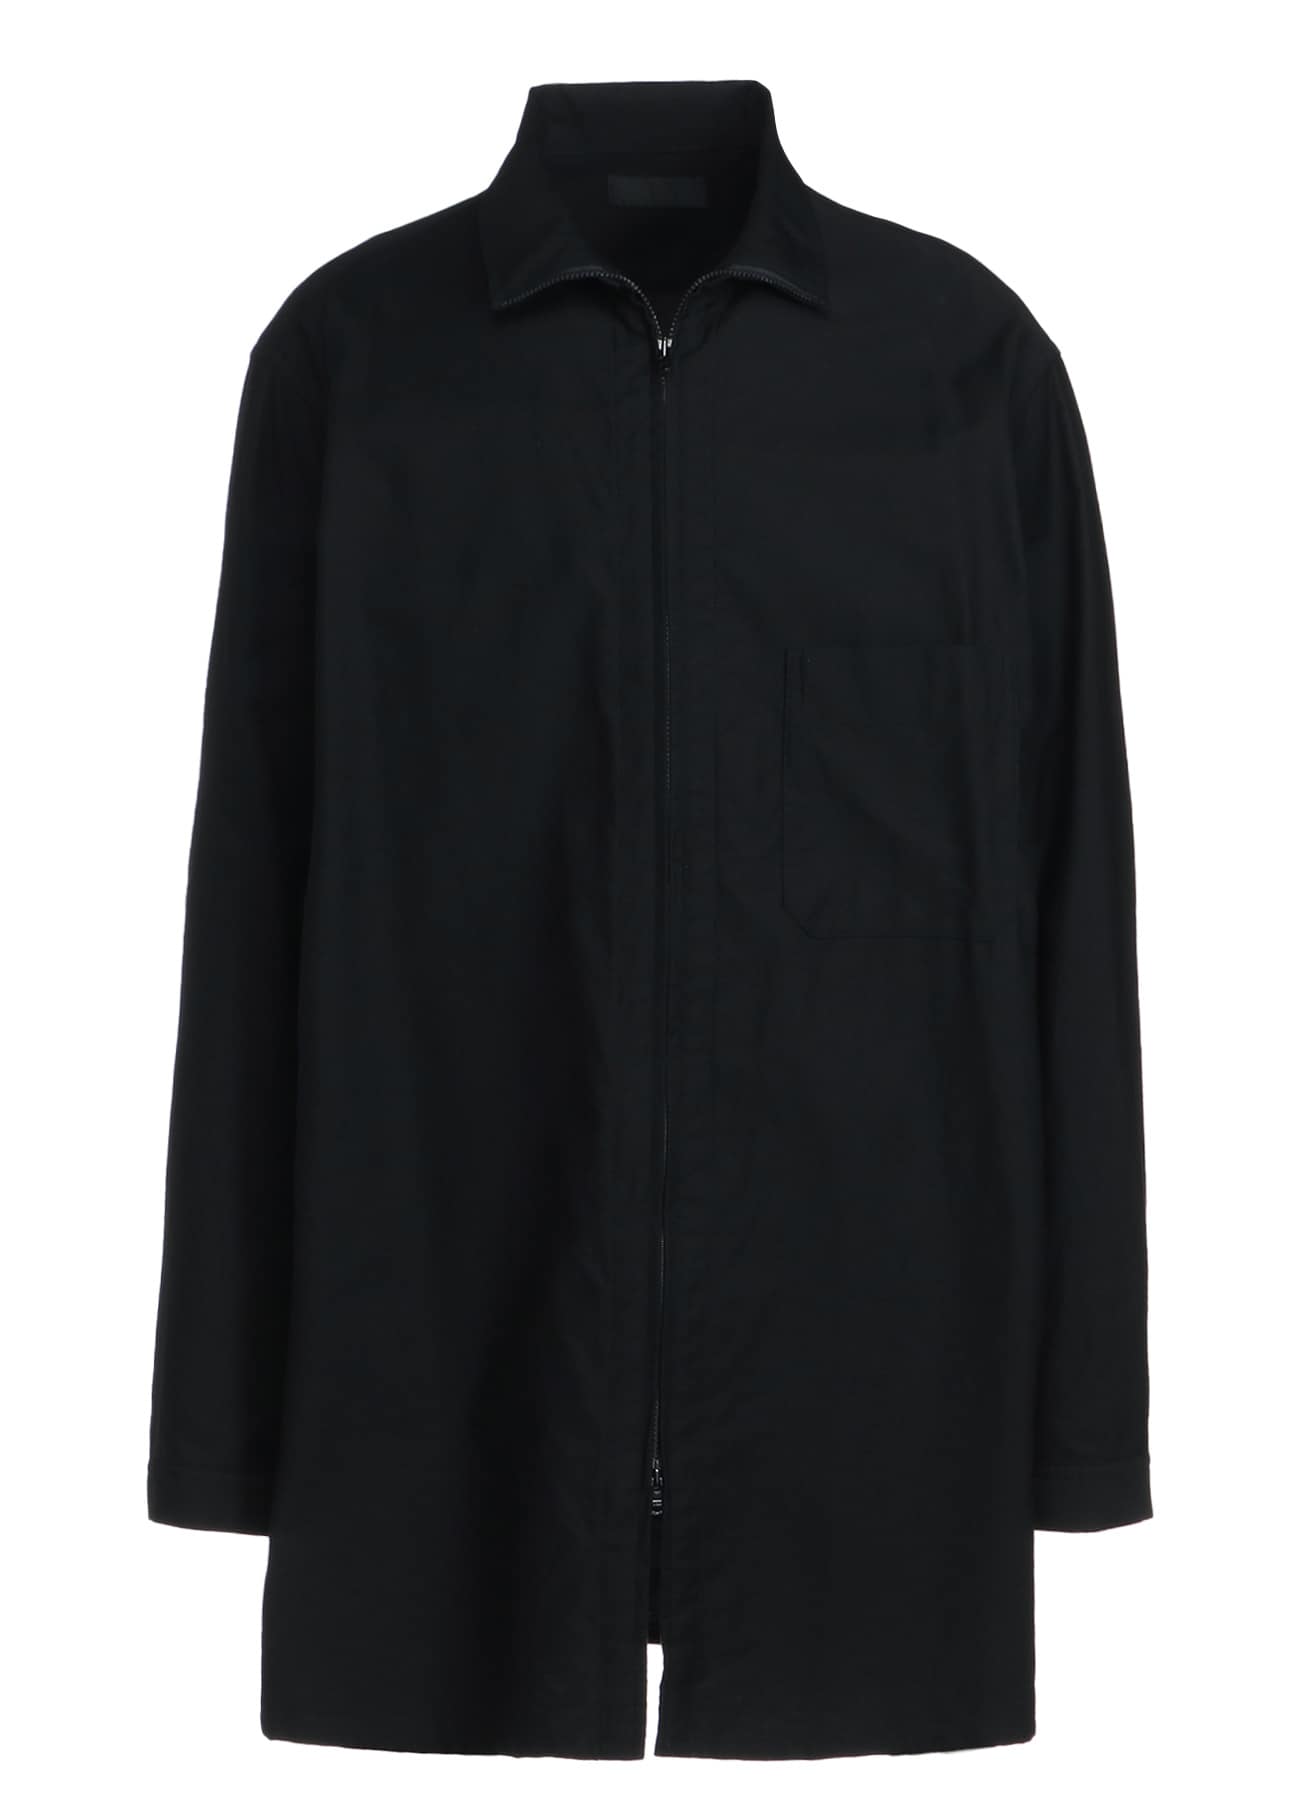 COTTON TWILL STAND COLLAR SHIRTS WITH ZIP DESIGN